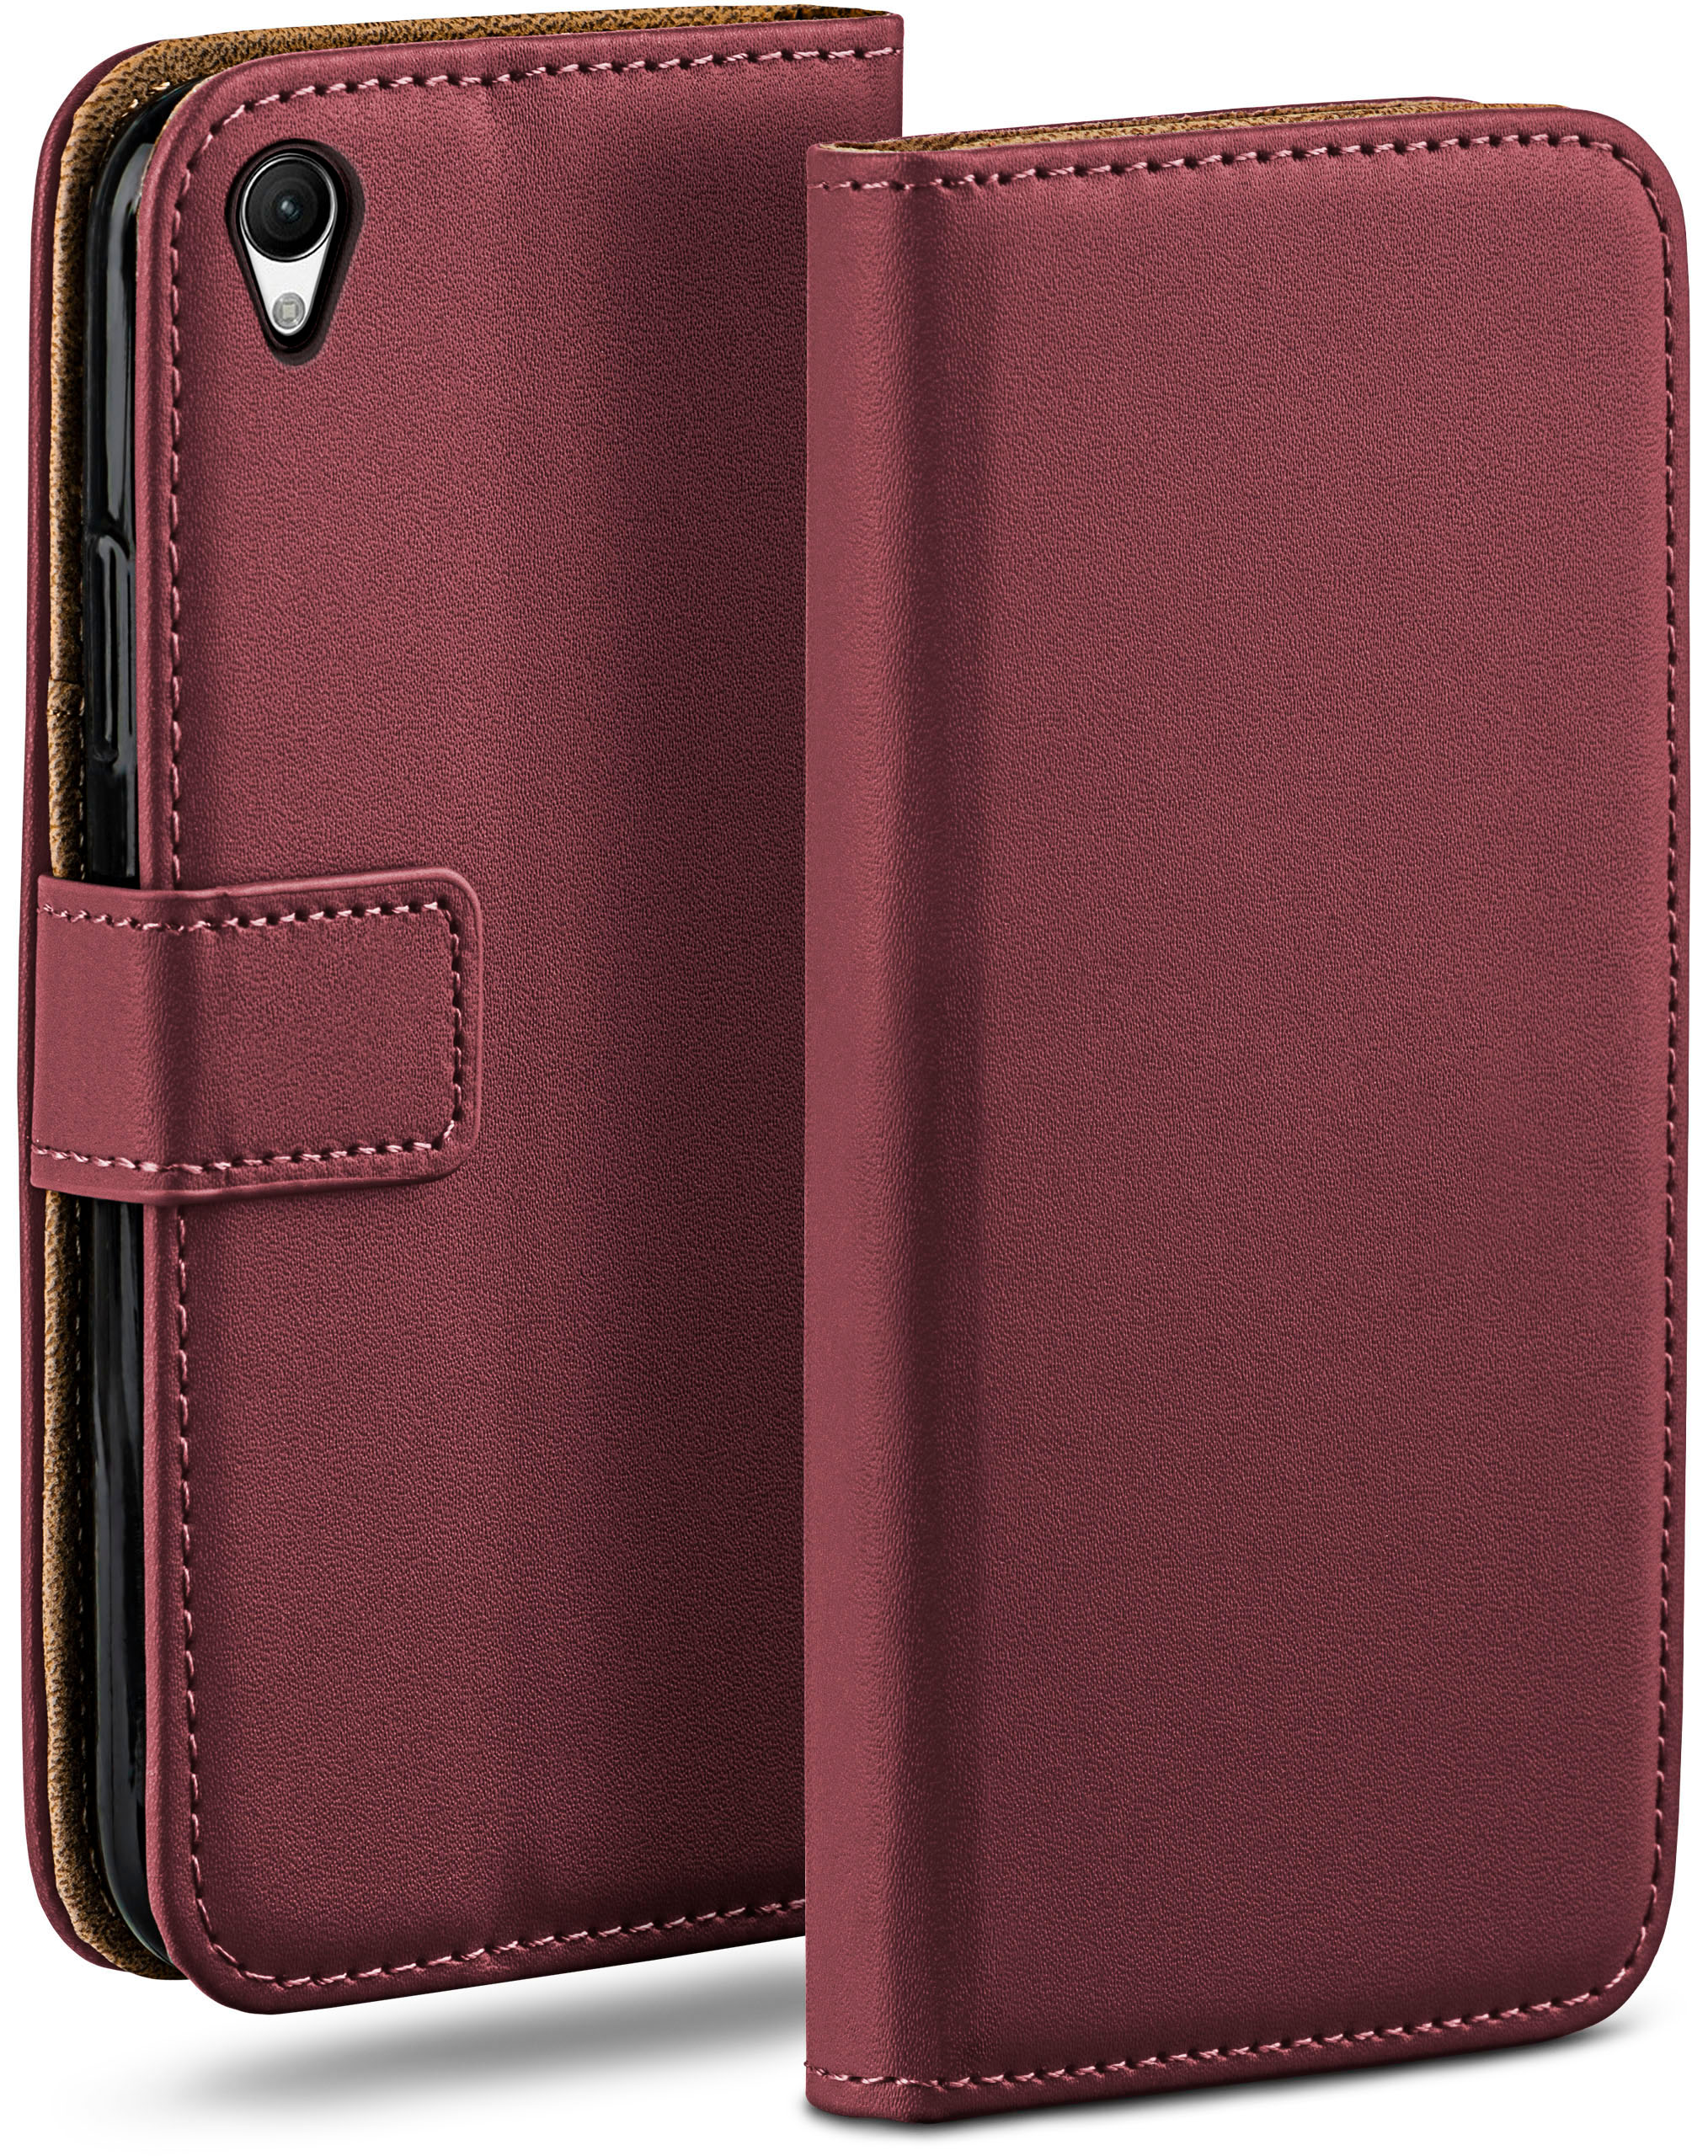 Z3, Sony, Bookcover, Maroon-Red Xperia MOEX Book Case,